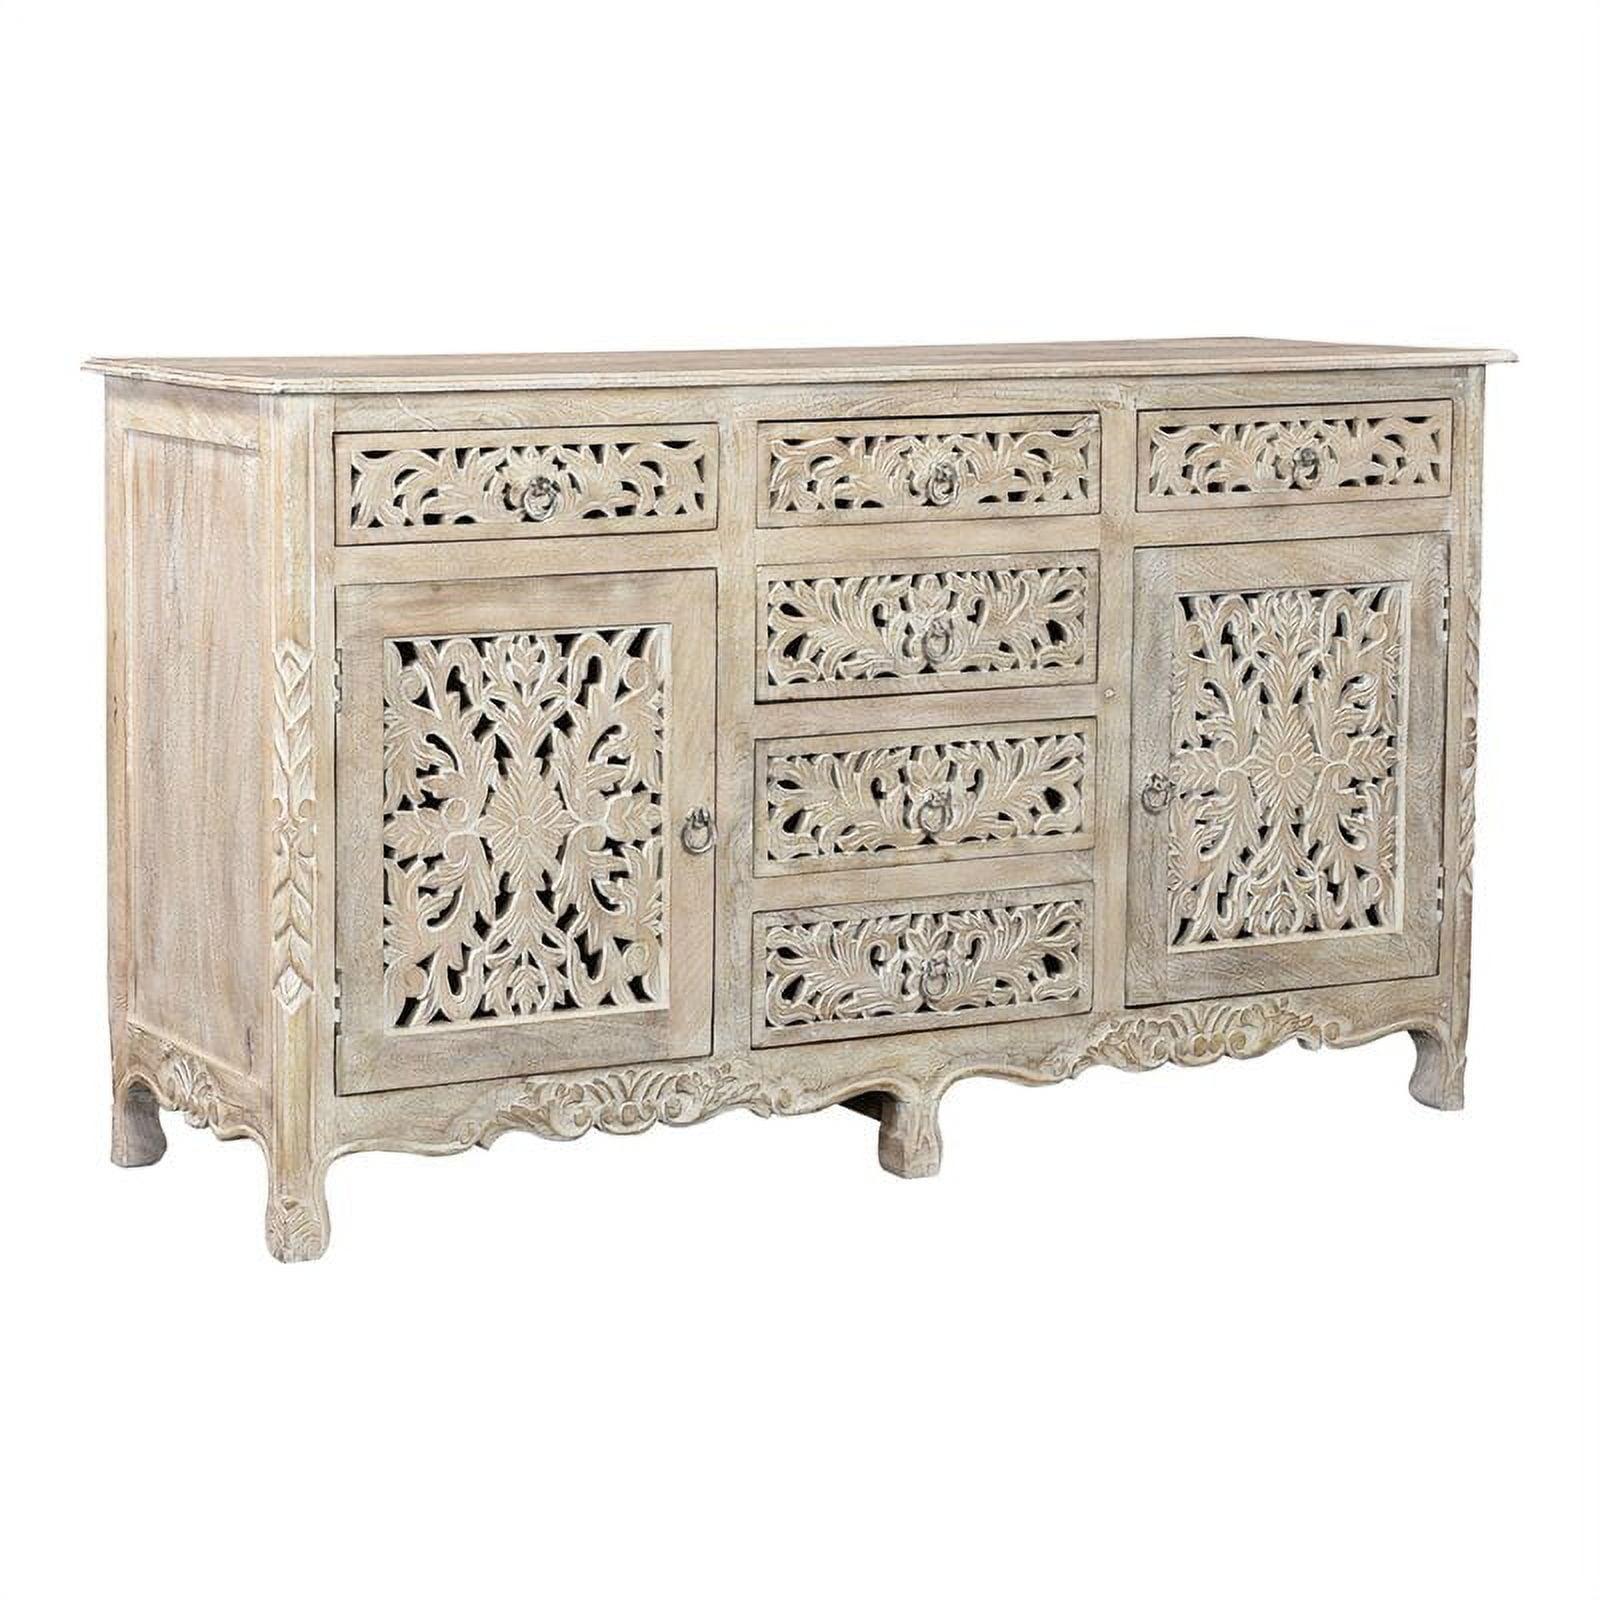 Artisanal White Carved 66" Mango Wood Sideboard with Metal Accents